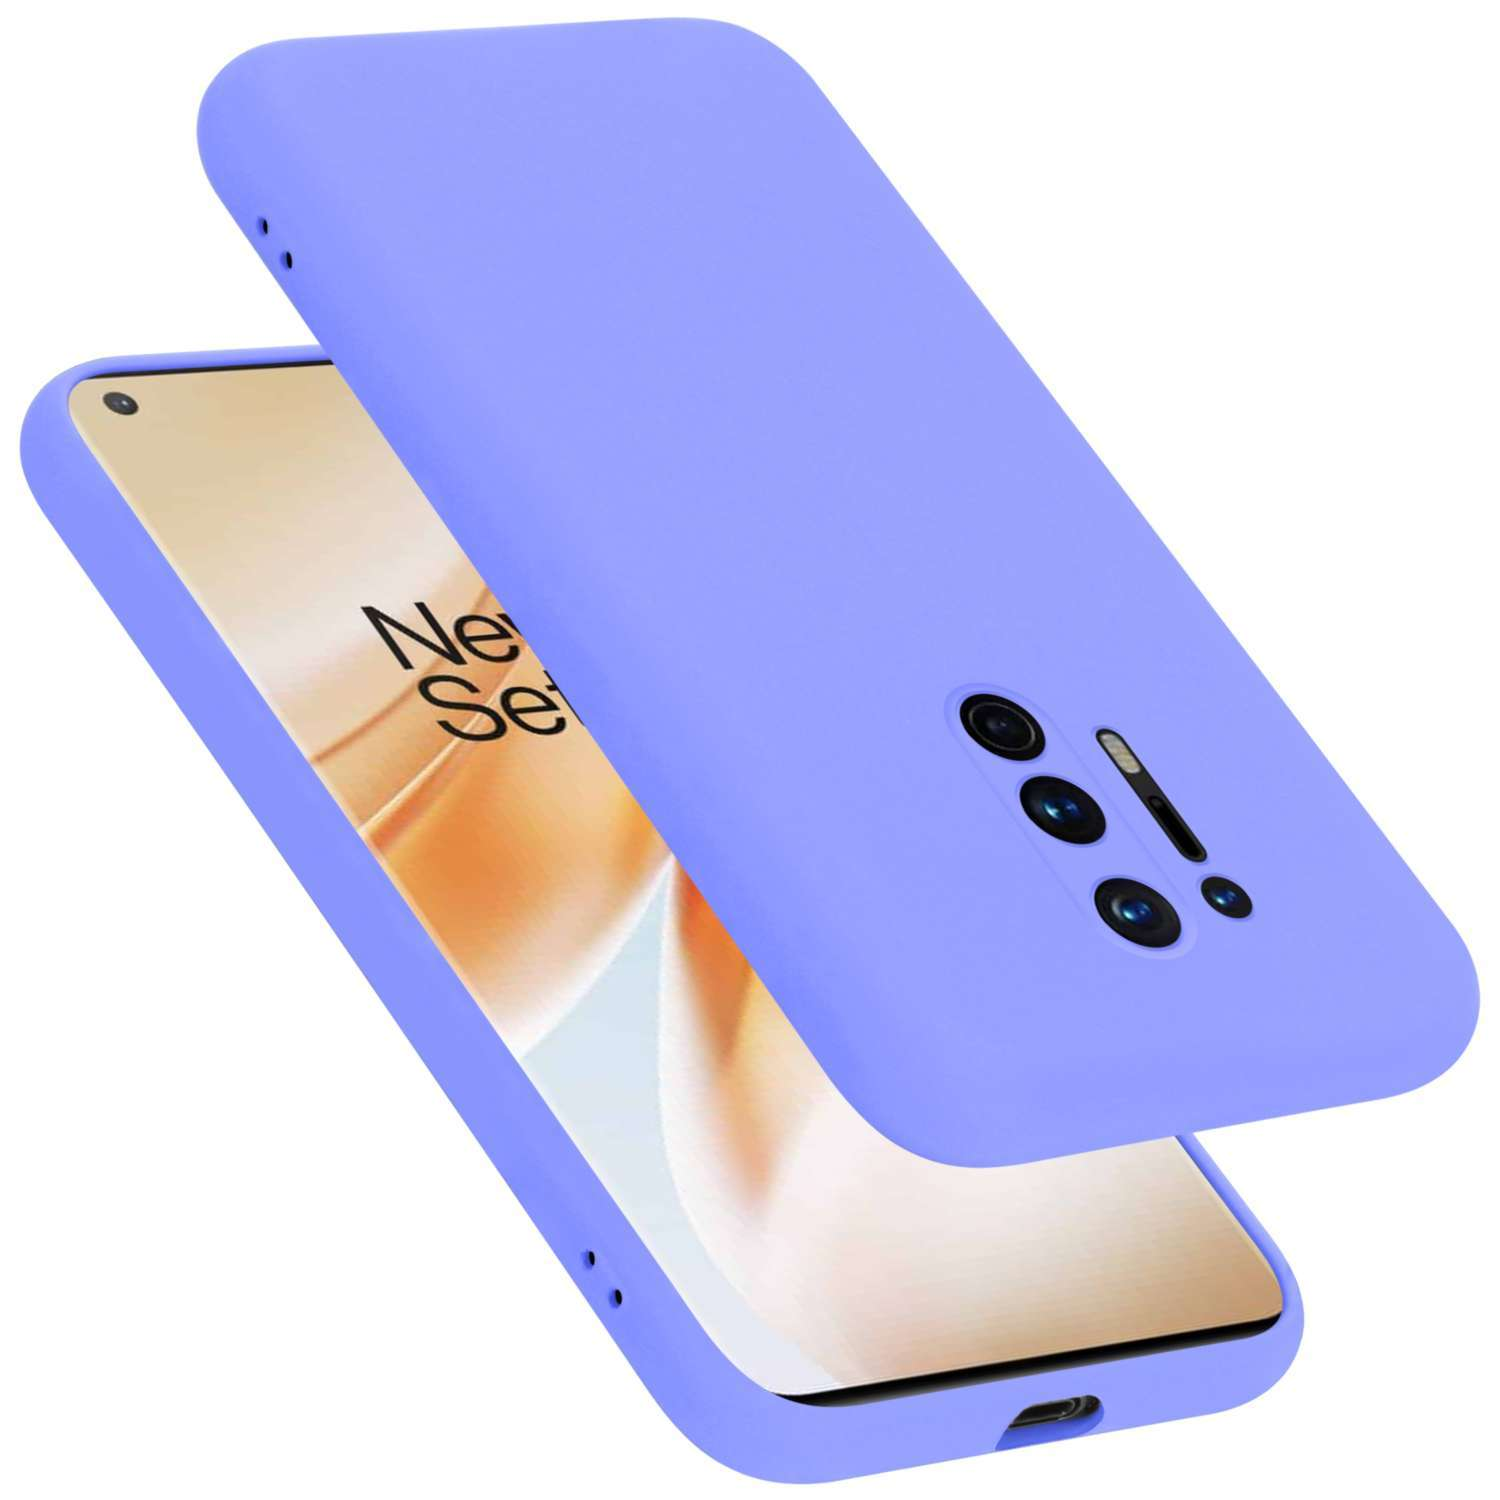 Liquid LIQUID Silicone OnePlus, LILA Case Backcover, PRO, 8 CADORABO Hülle Style, HELL im